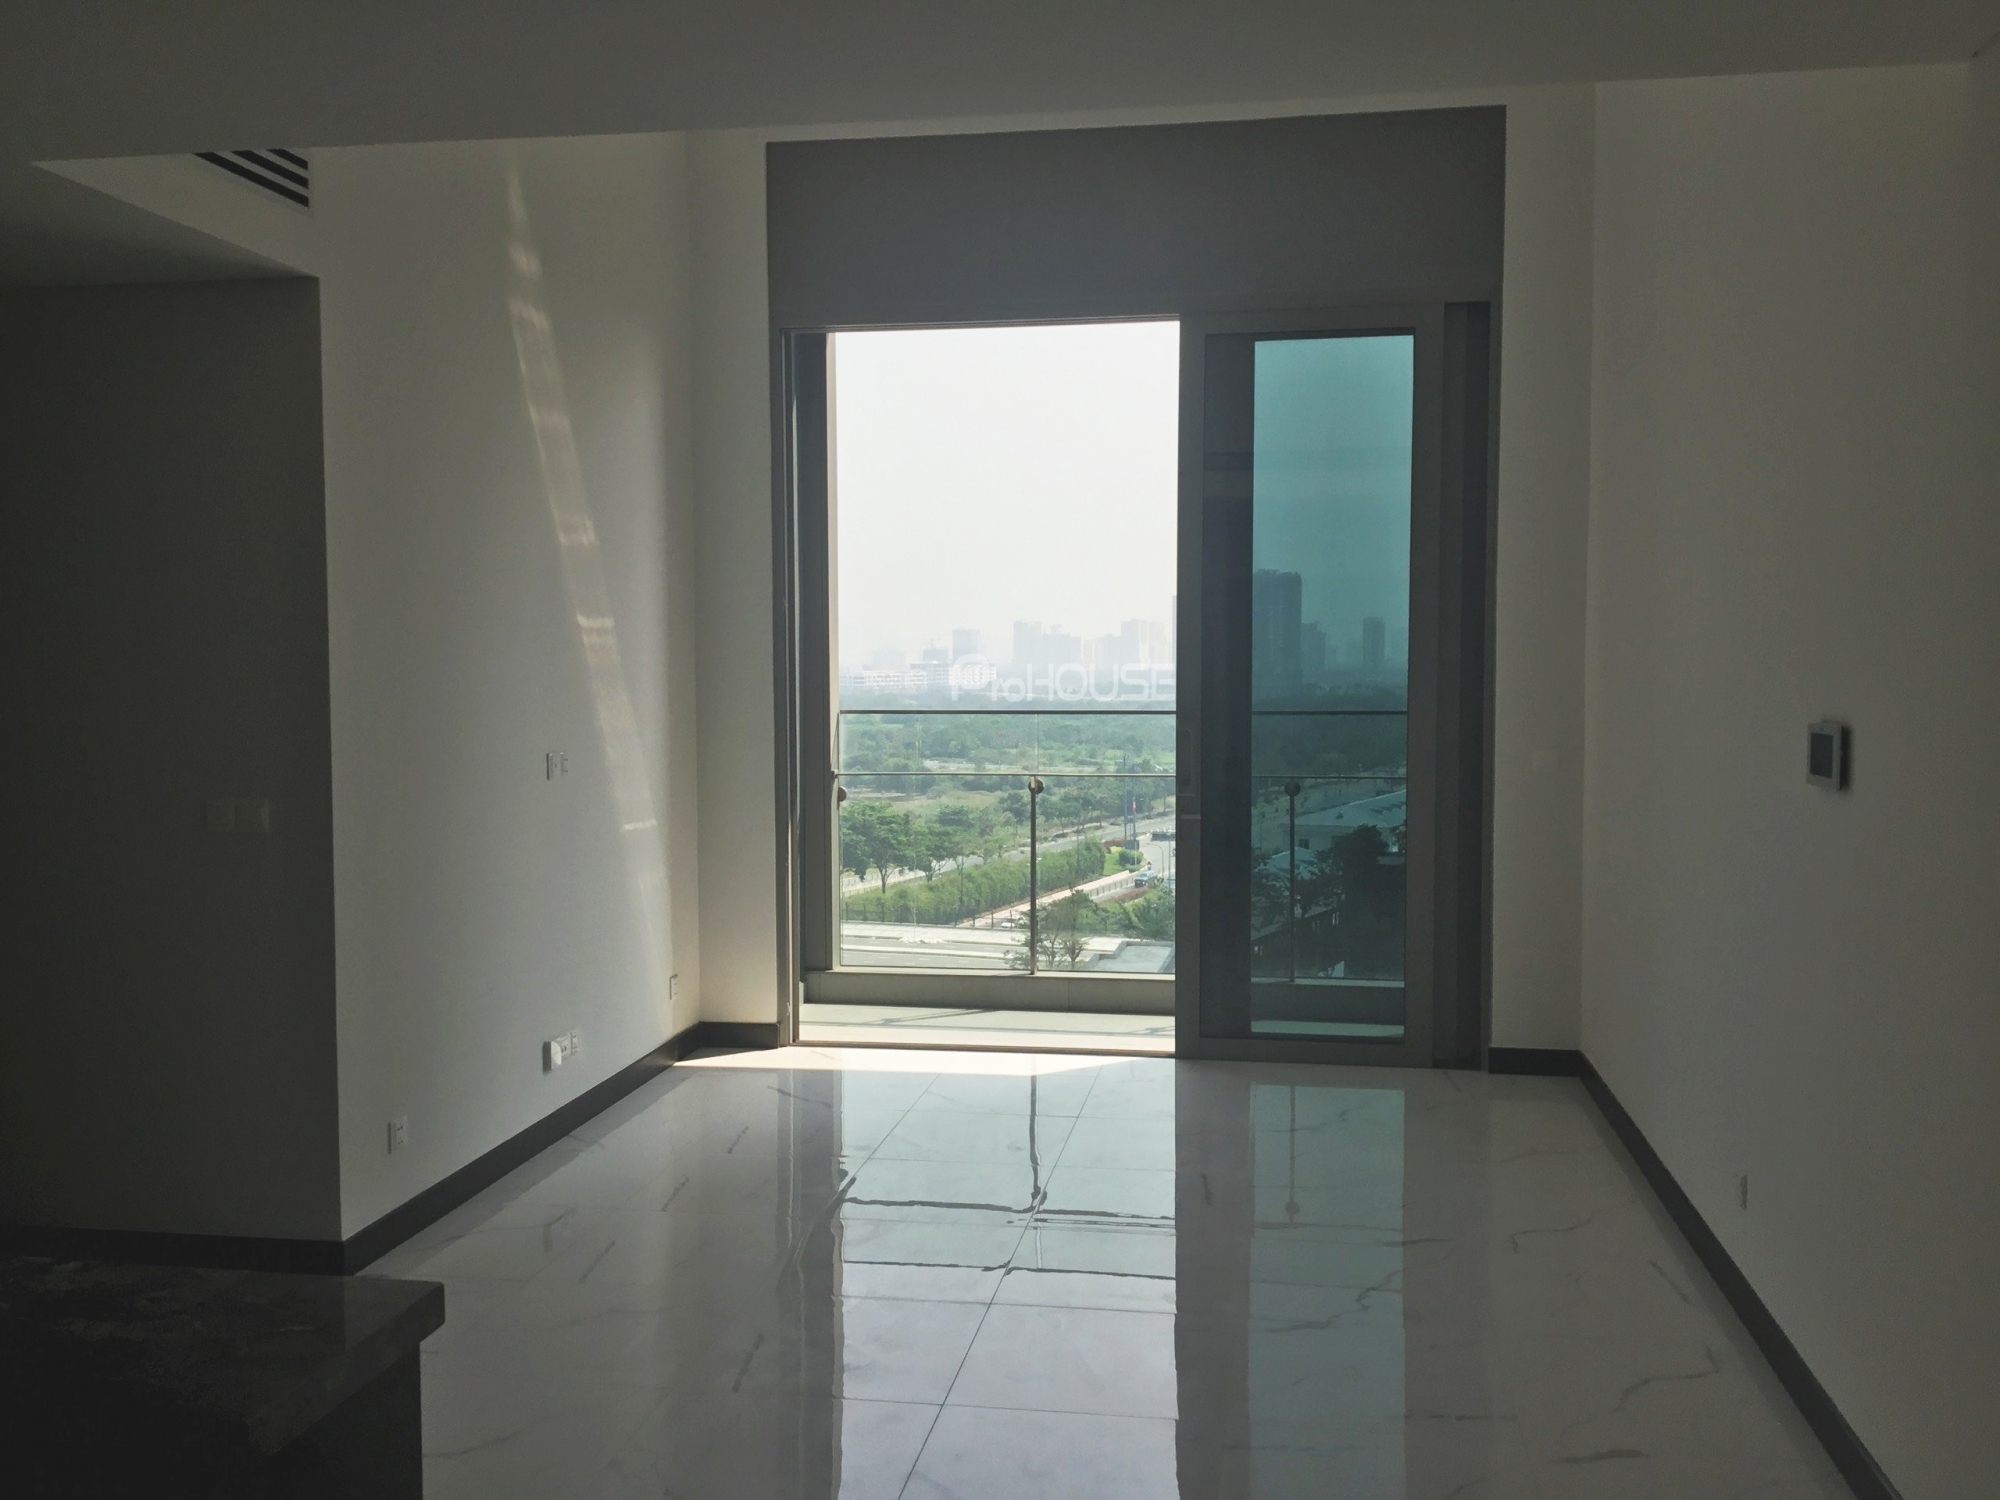 1 bedroom apartment for rent with open view in Tilia-Empire City with basic furniture